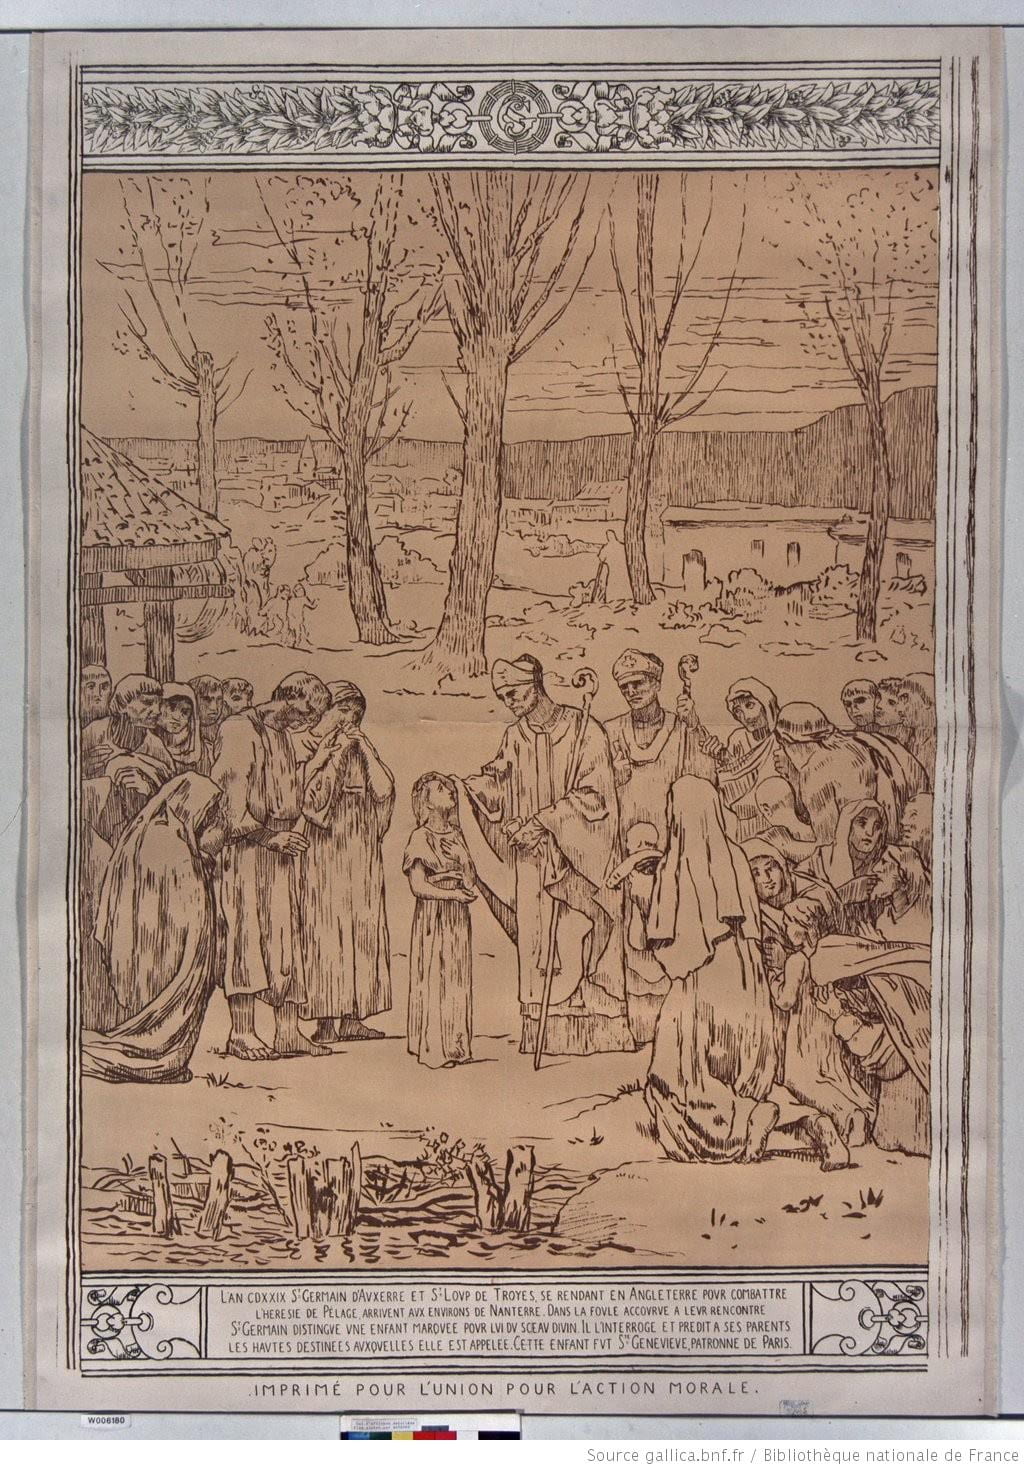 Puvis de Chavannes, Scene from the Life of Saint Genevieve, patroness of Paris - Printed for the Union for Moral Action, 1898 (BnF)